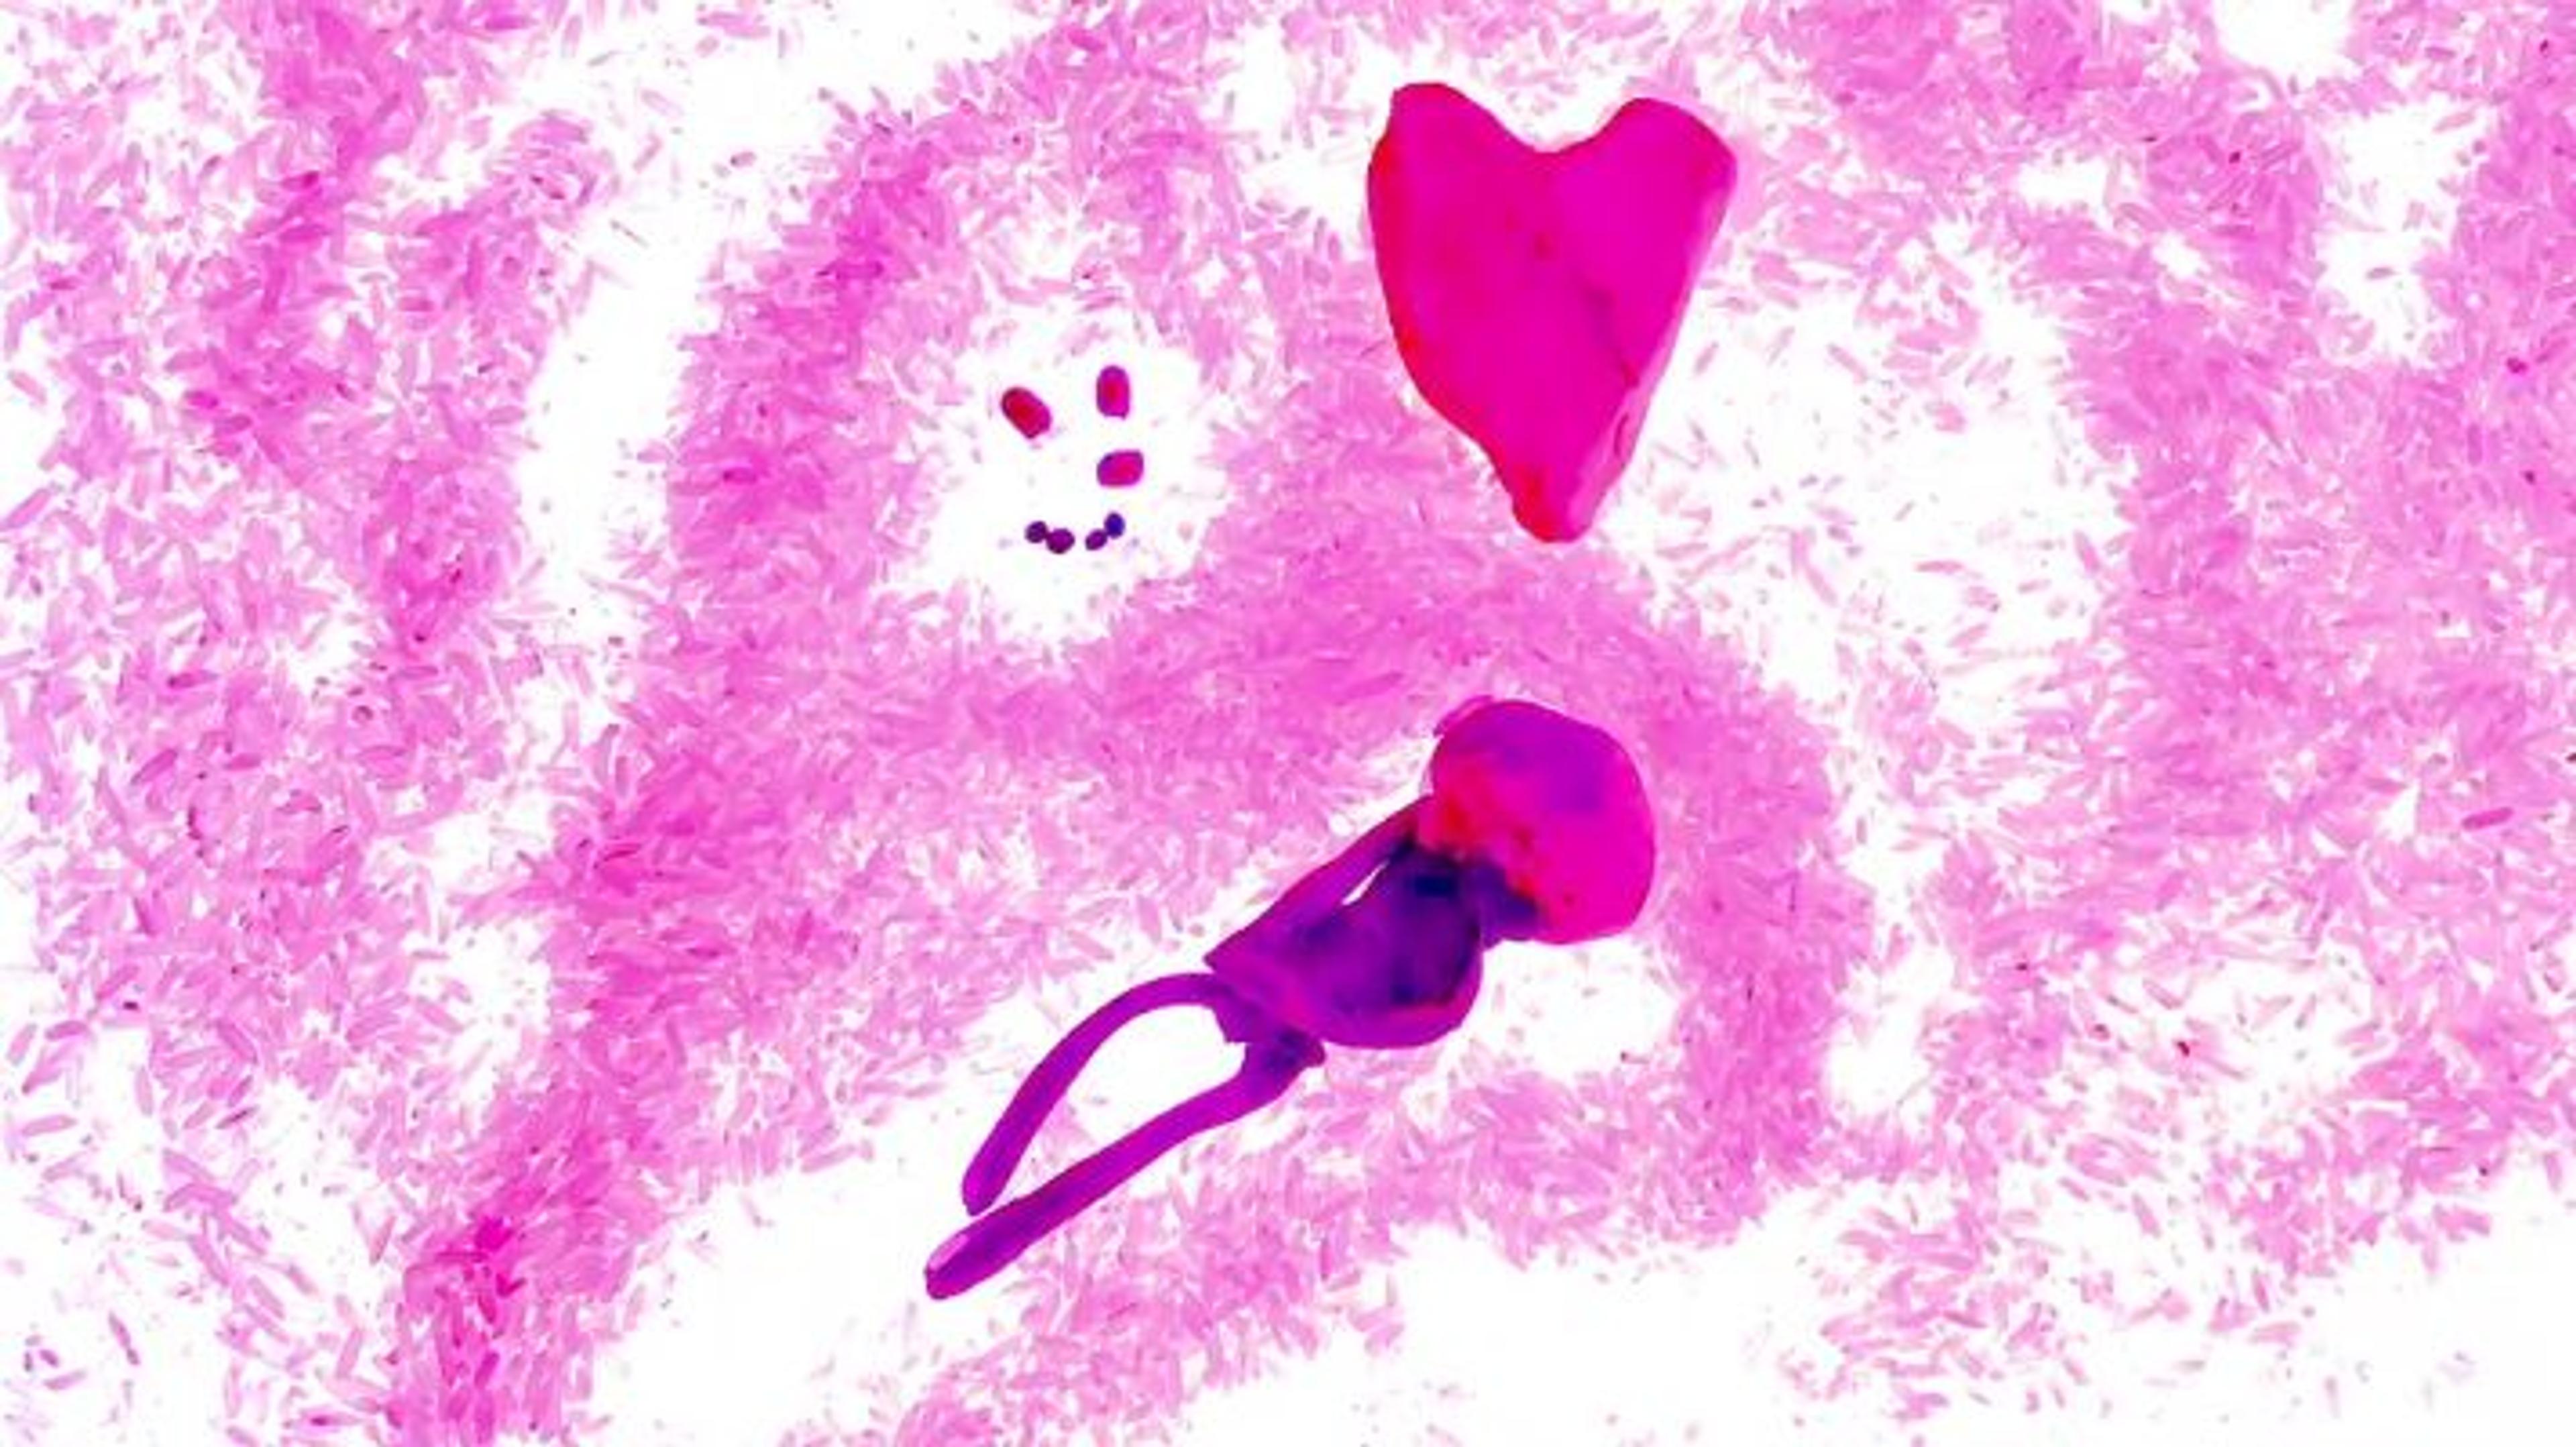 Illustration of a pink textured background with a heart, smiling face and shape of a baby on top of it.